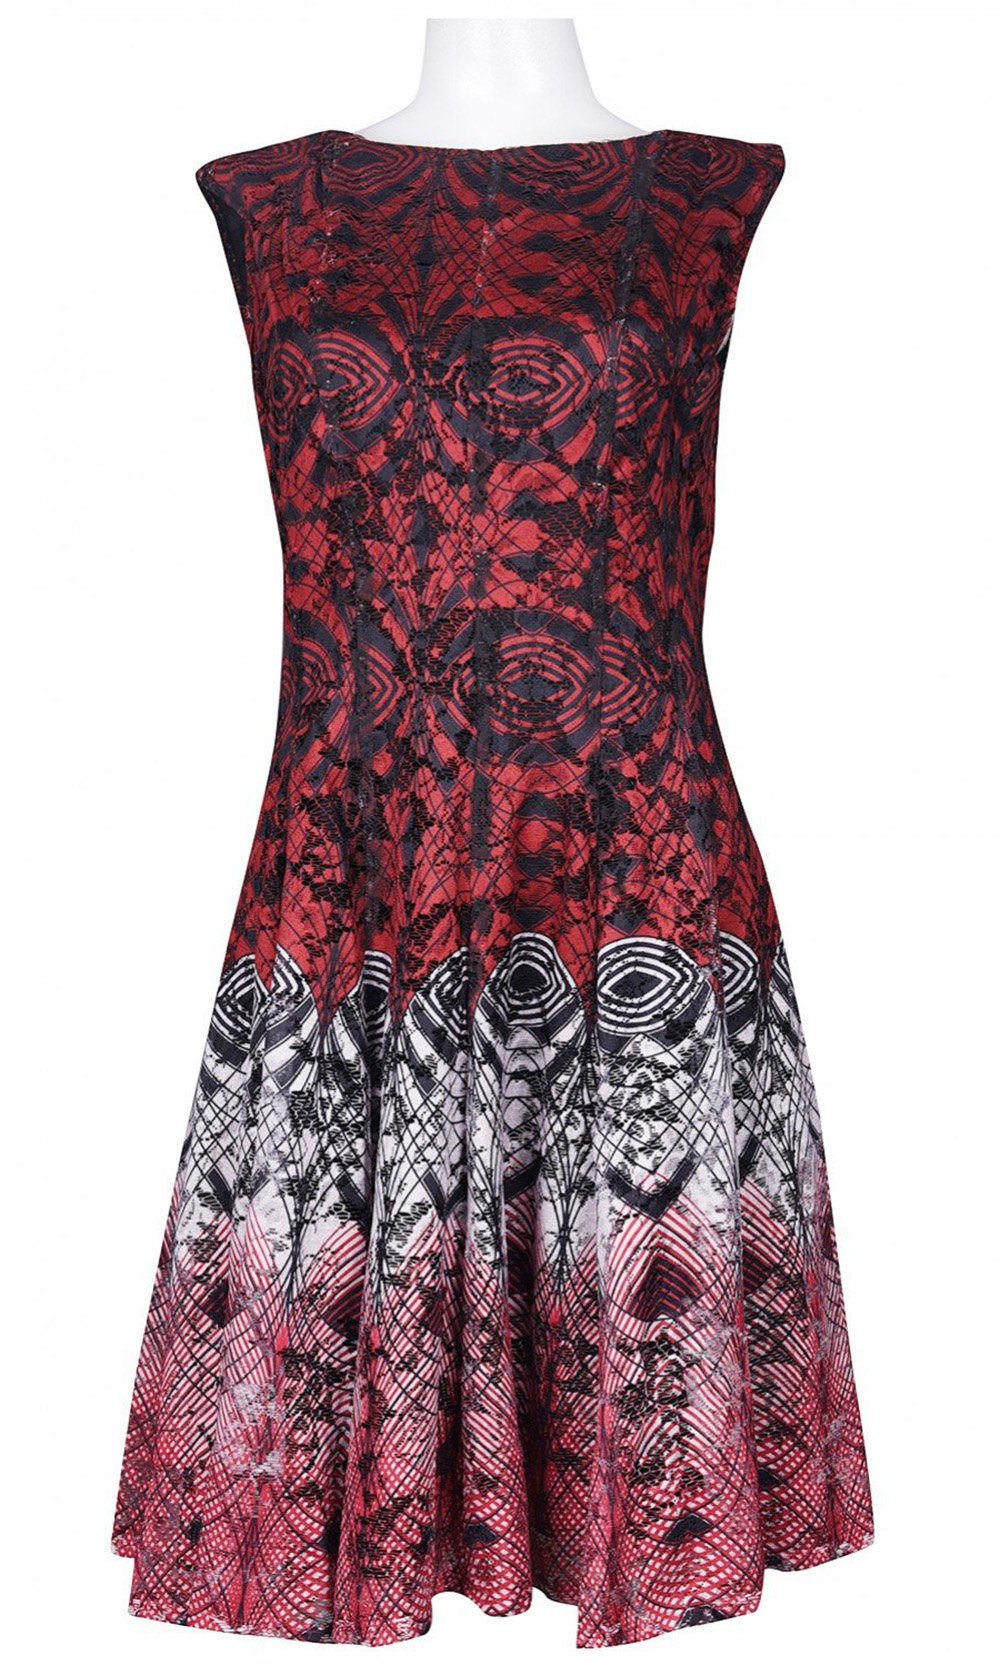 Gabby Skye - 56339MG Multi-Print Gradient Knit Lace A-Line Dress In Red and Multi-Color